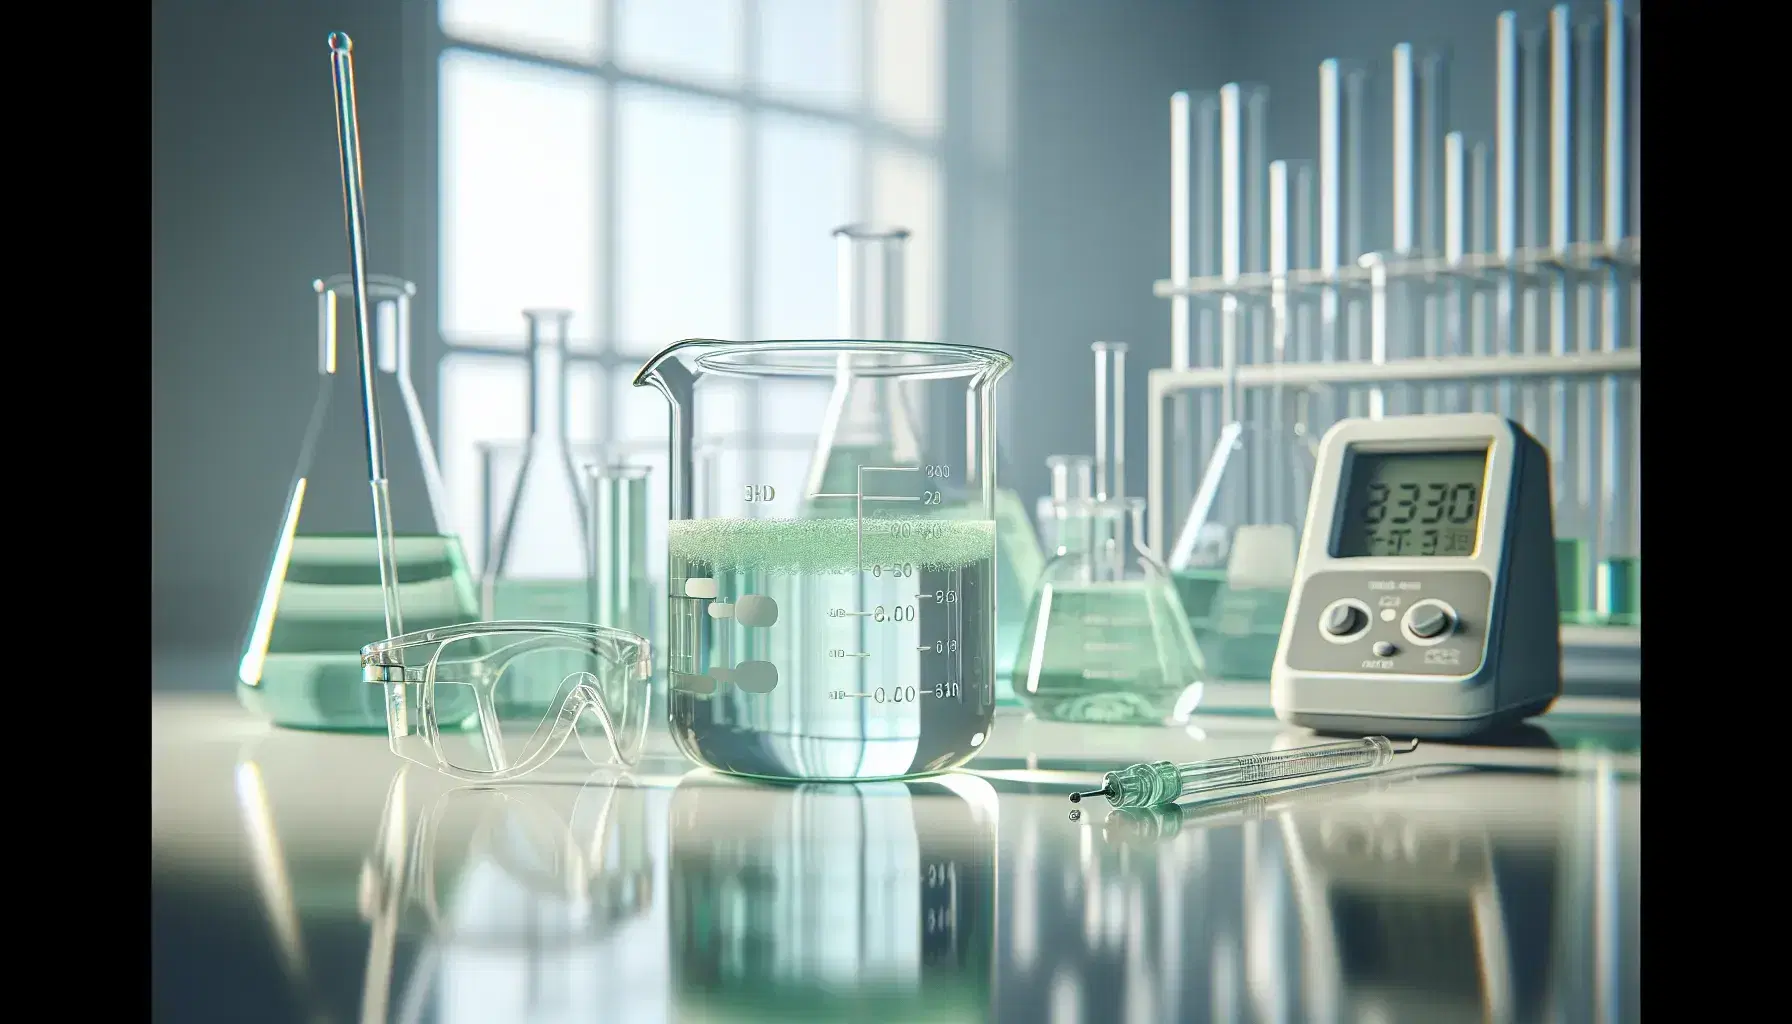 Glass beaker with light green liquid, stirring rod, safety glasses and blurred background with colorful laboratory glassware.